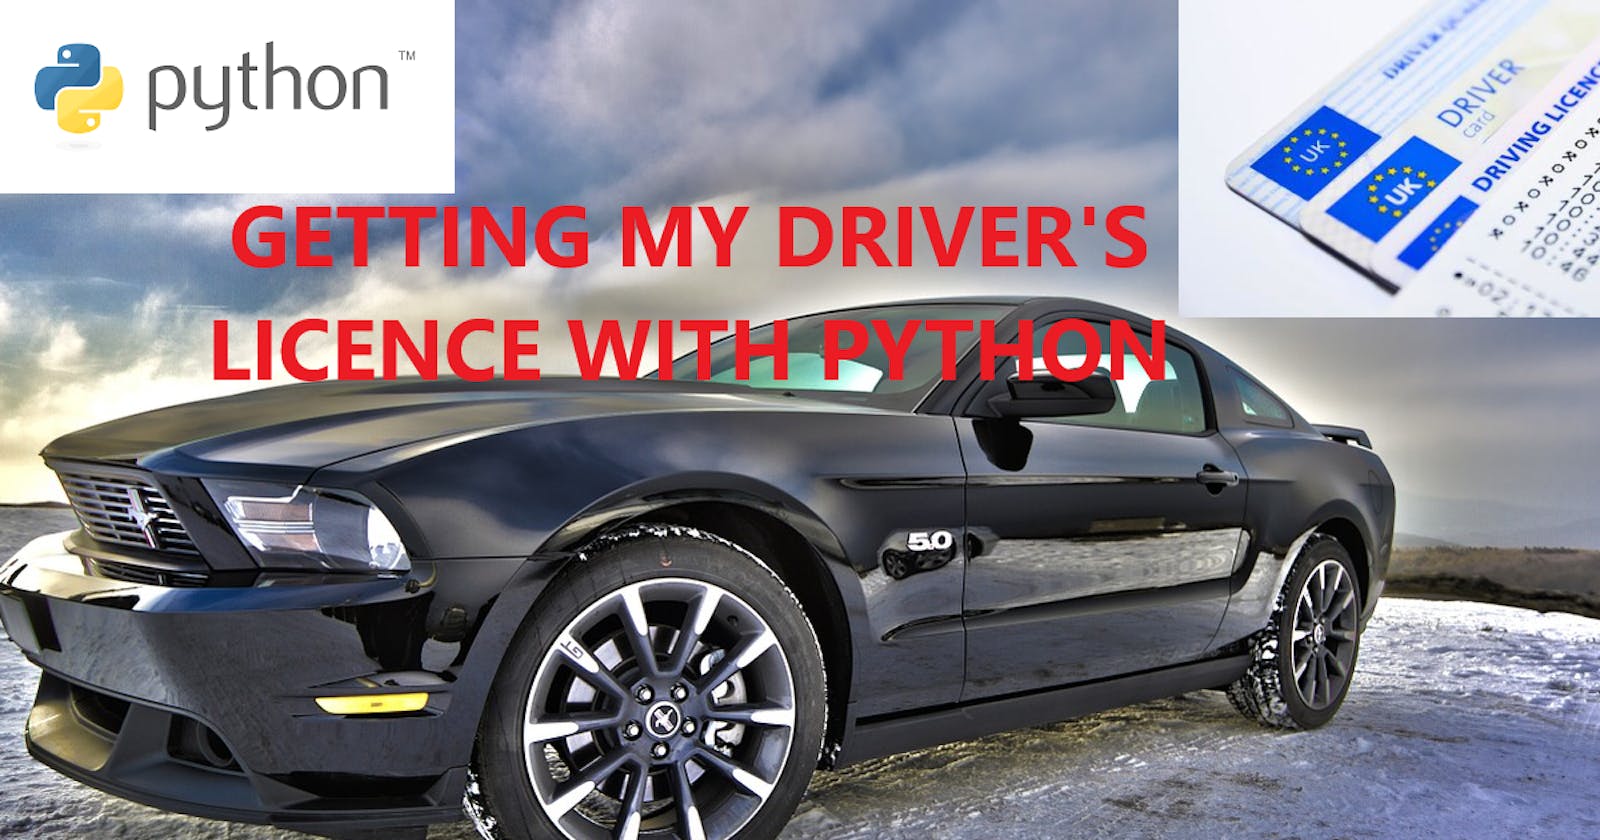 Getting my driver's licence faster with Python